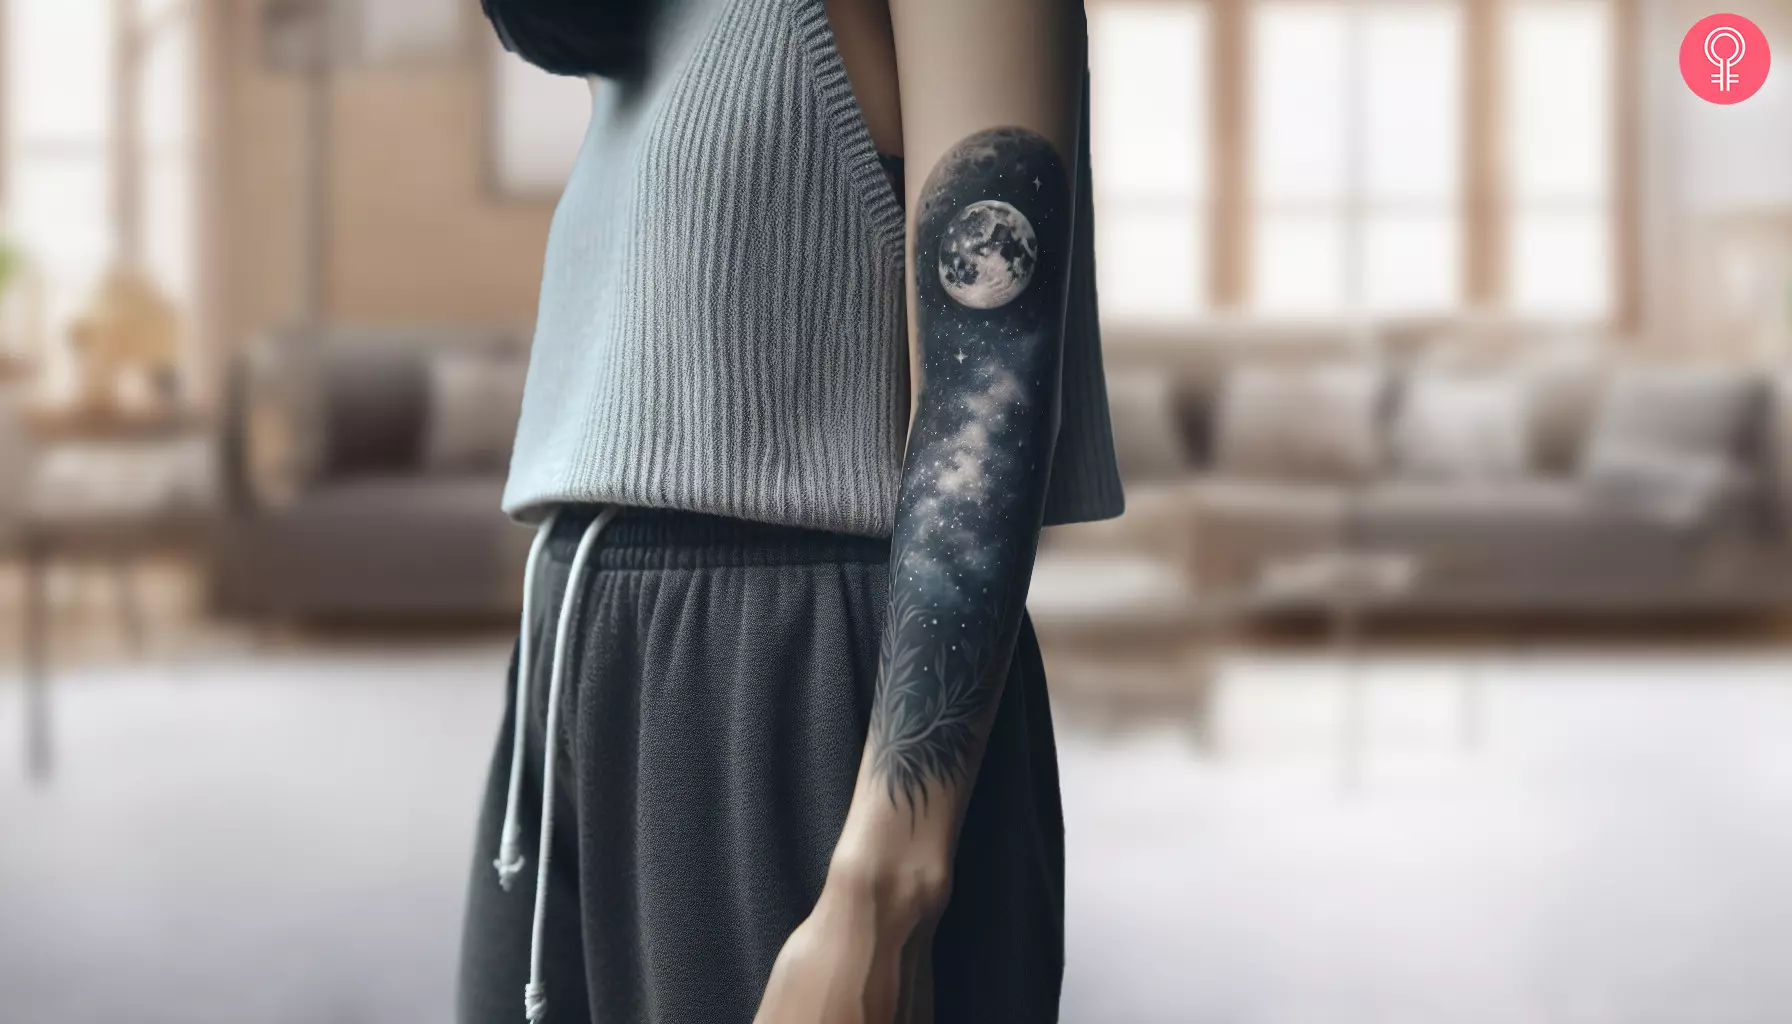 A tattoo of the moon and stars etched on the sleeve